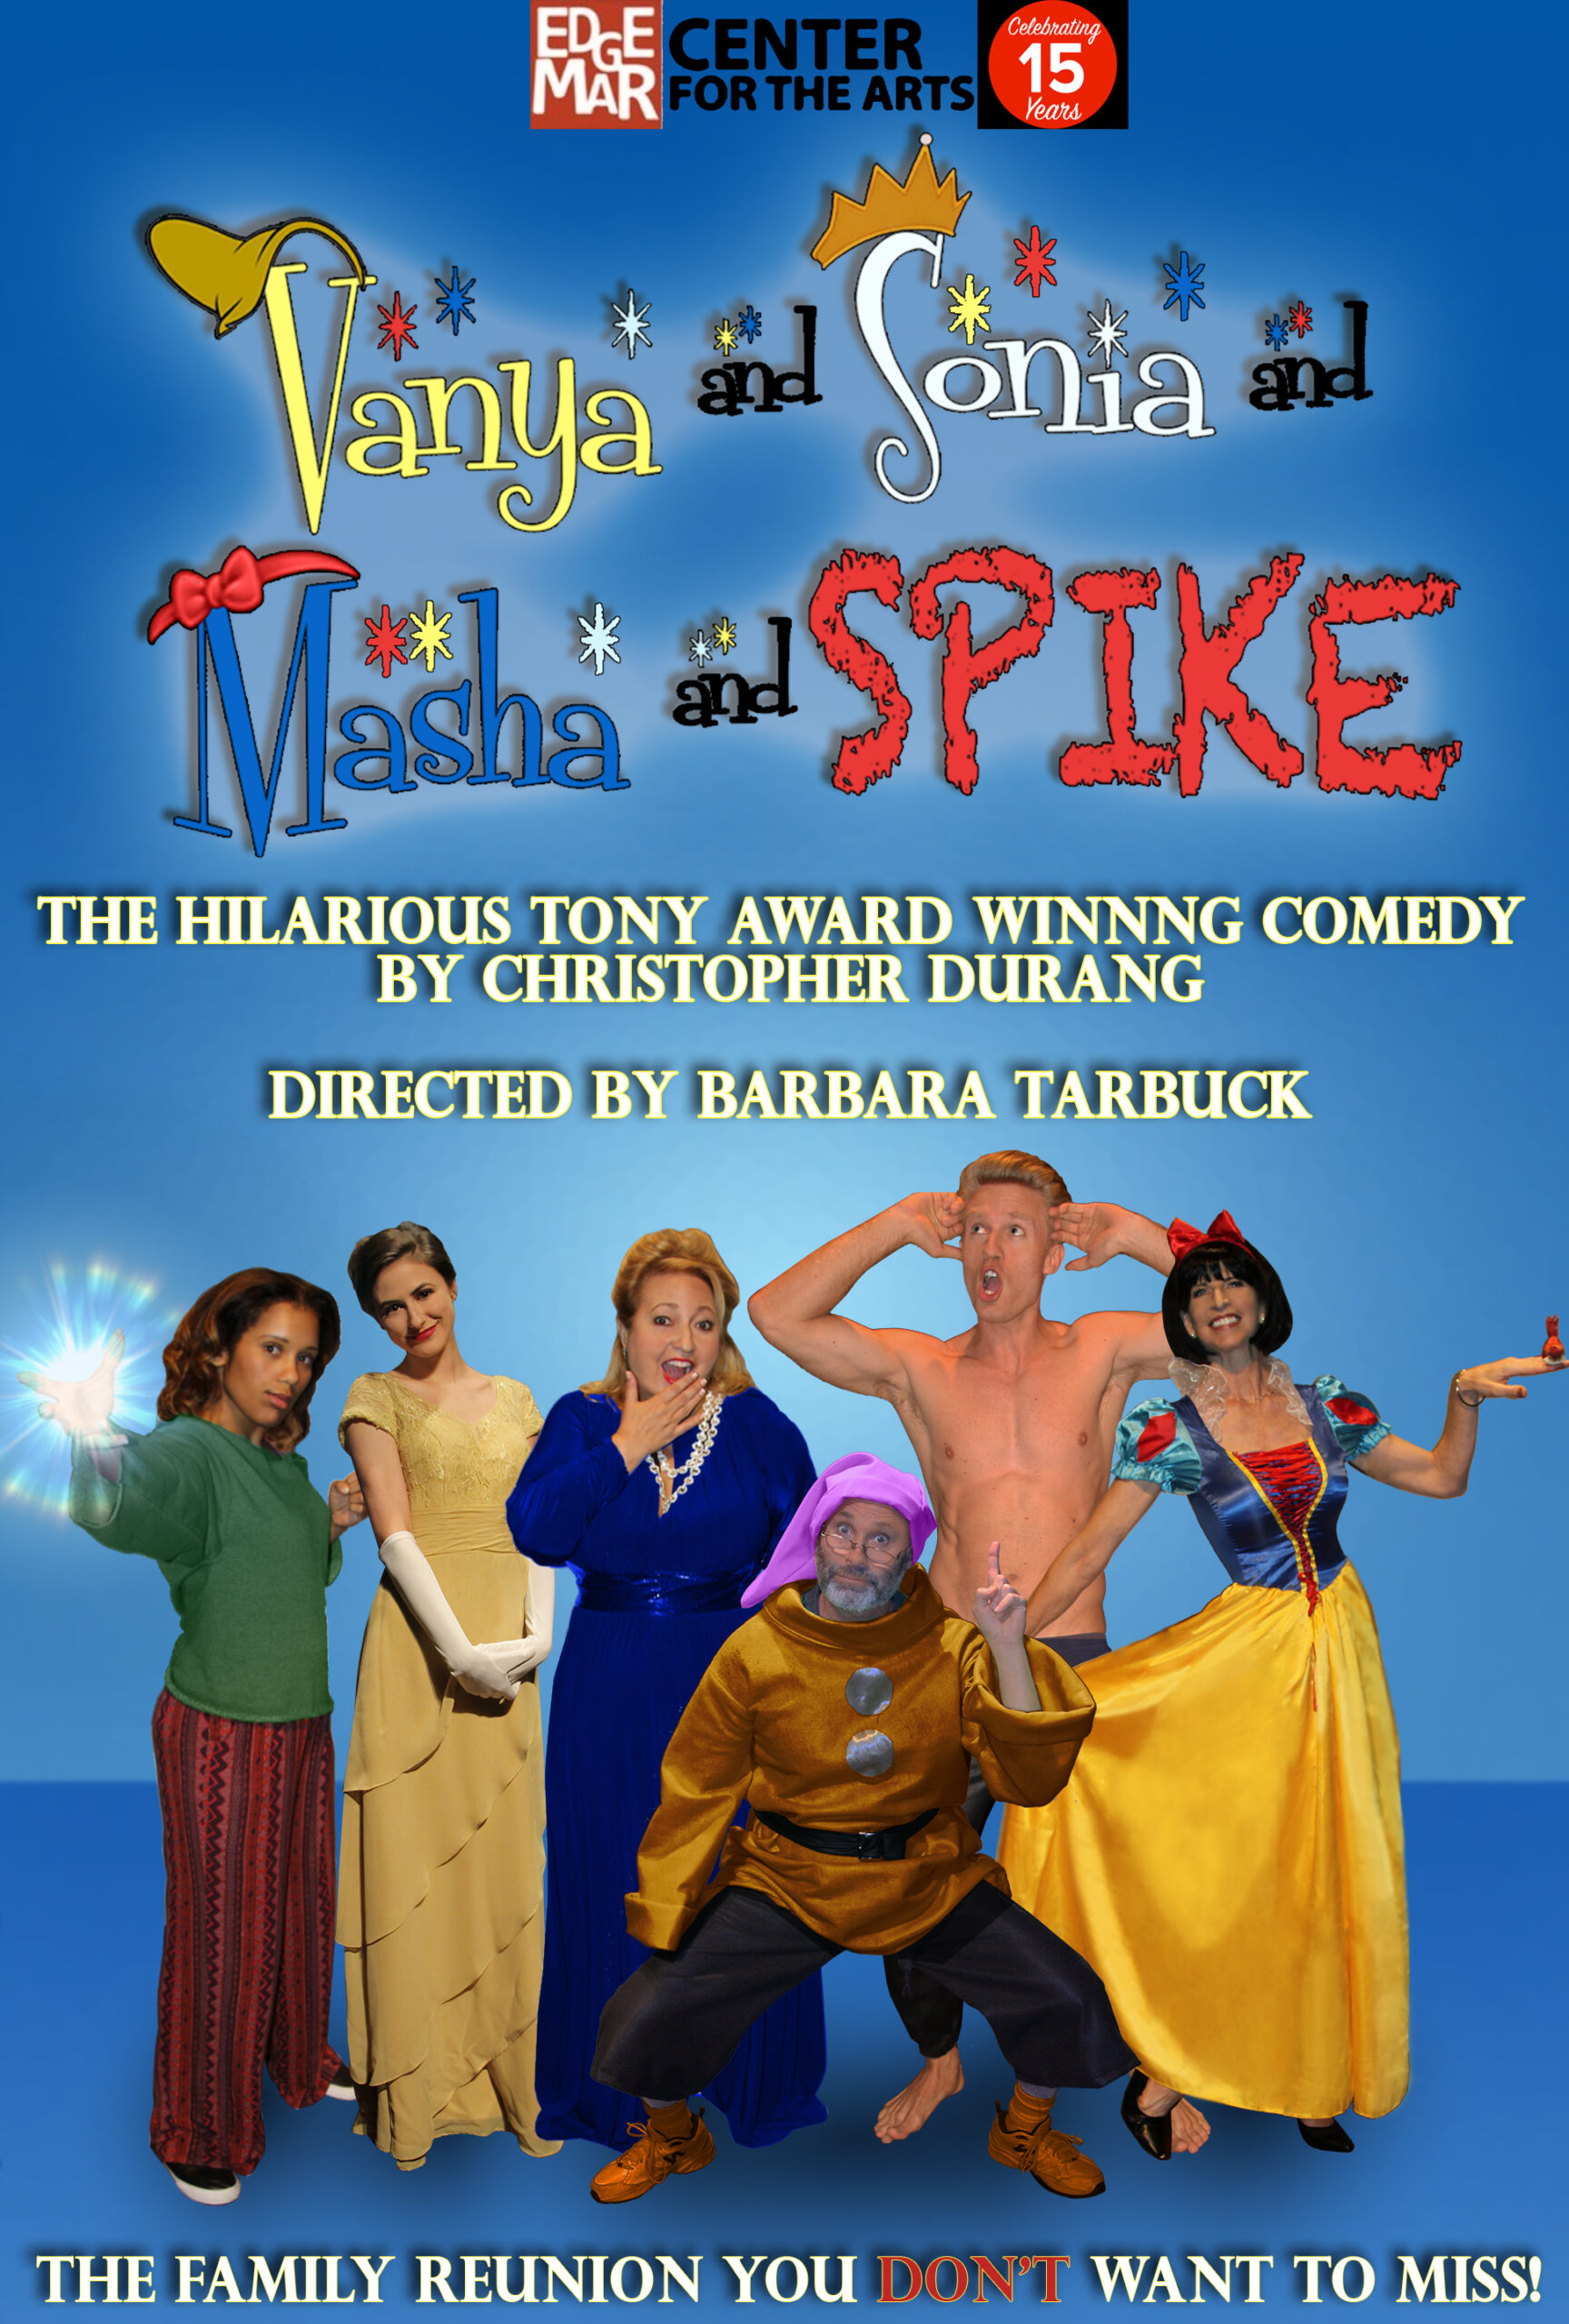 Theater in Los Angeles: Vanya and Sonia and Masha and Spike